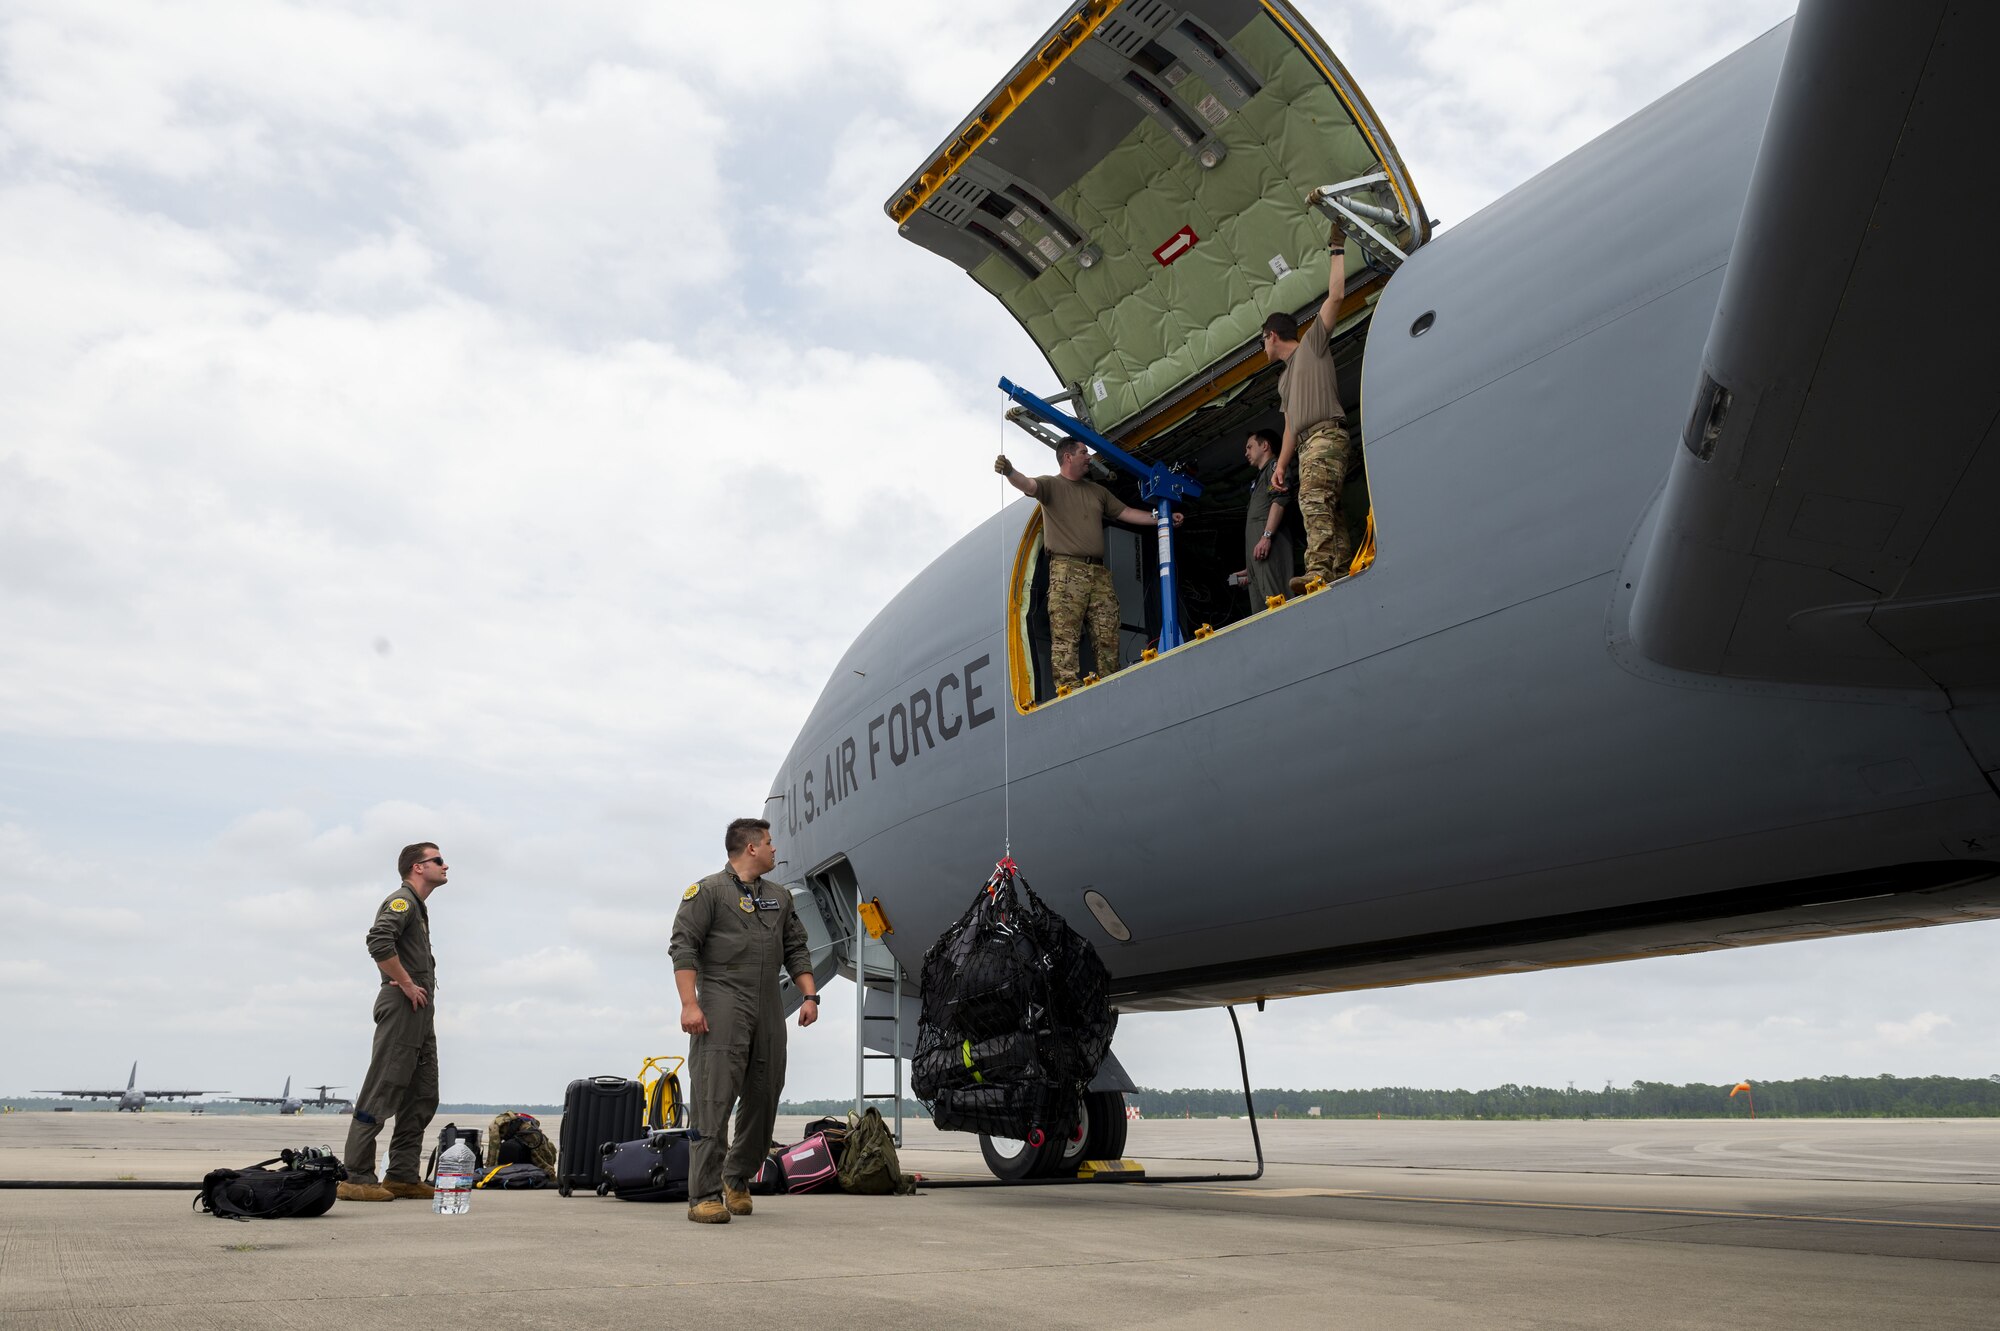 U.S. Air Force Airmen from the 509th Weapons Squadron load cargo using the Pack and Transport Reloader (PATR) crane prototype at Hurlburt Field, Florida, May 12, 2023. The 509th WPS partnered with Fairchild Air Force Base’s innovation cell to create the crane with a goal of expanding the KC-135 Stratotanker’s ability to load and unload various types of cargo using the PATR crane prototype. (U.S. Air Force photo by Staff Sgt. Lawrence Sena)